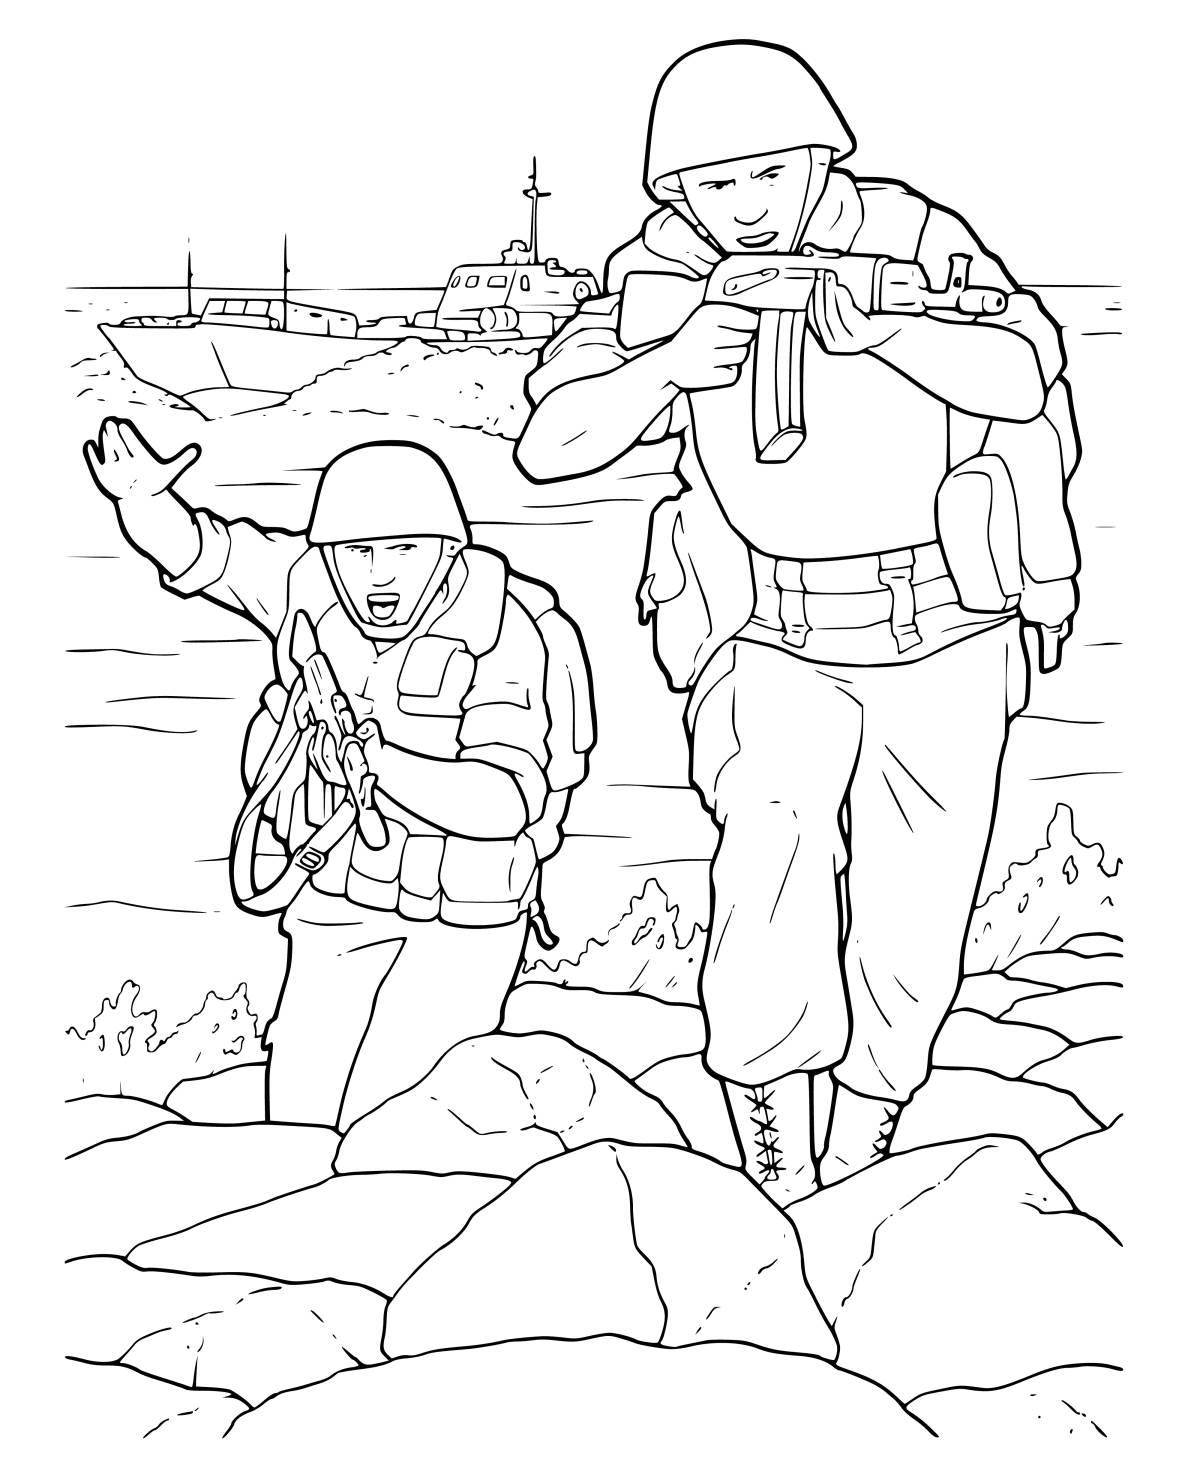 Coloring book gallant soldiers at war